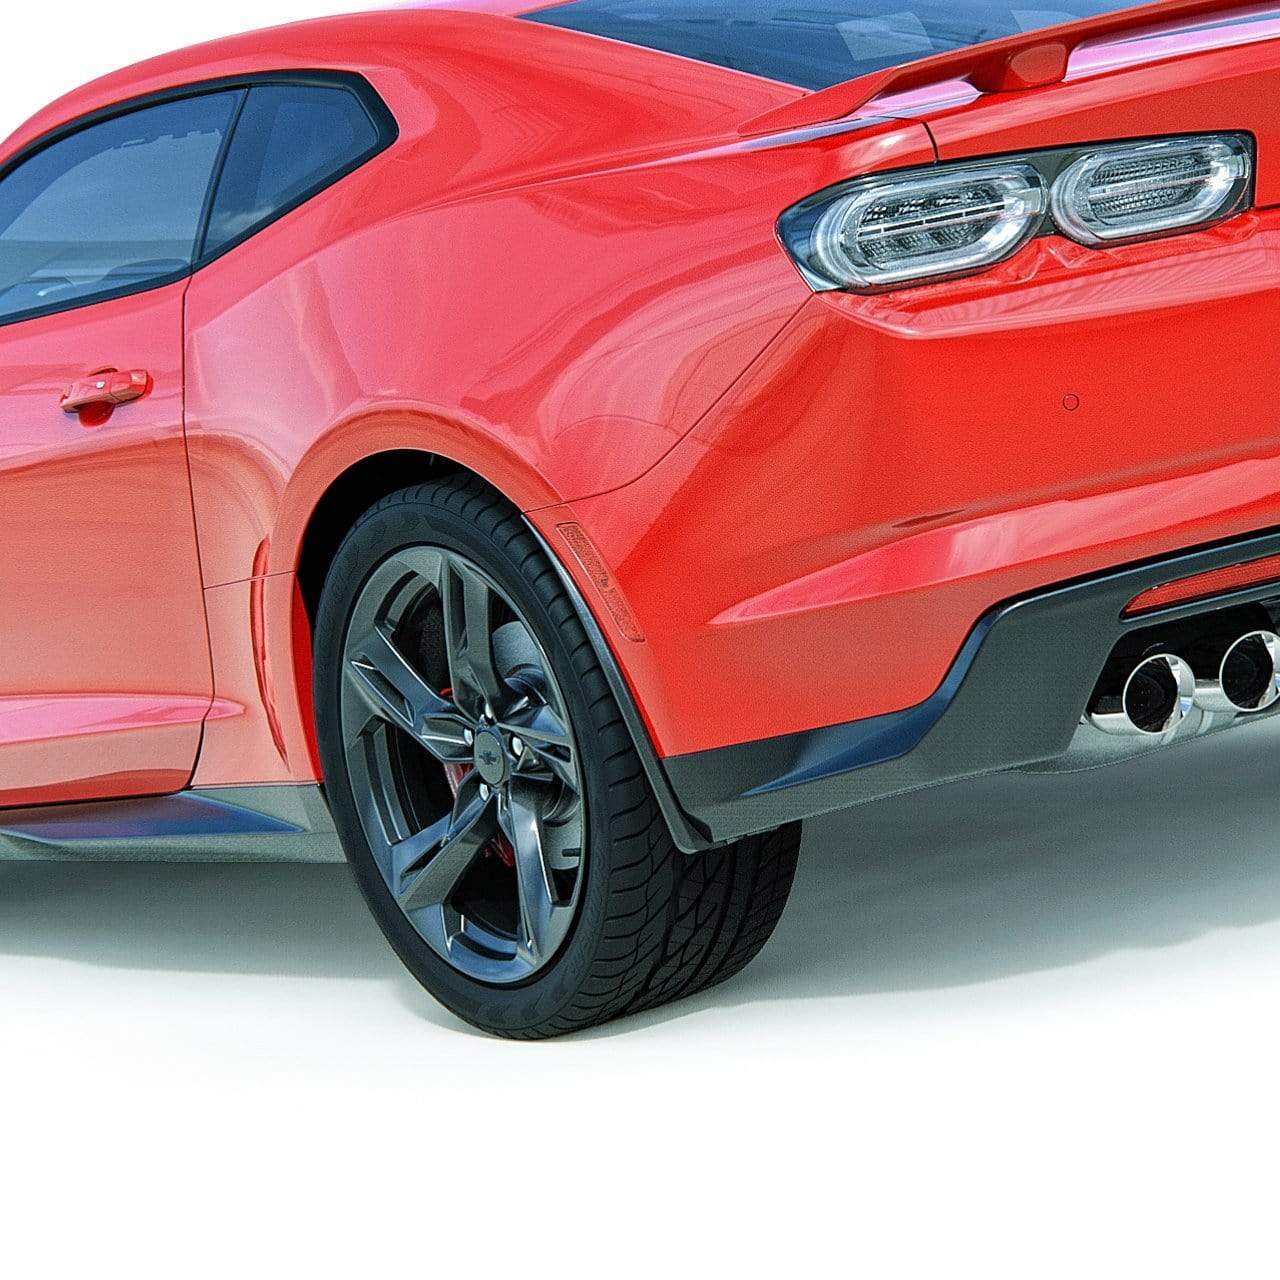 ACS Composite Rear ZL1 Rock Chip Guards in Gloss Black (SKU: 48-4-107) for Camaro 2016+ - Protects against road debris and paint chipping